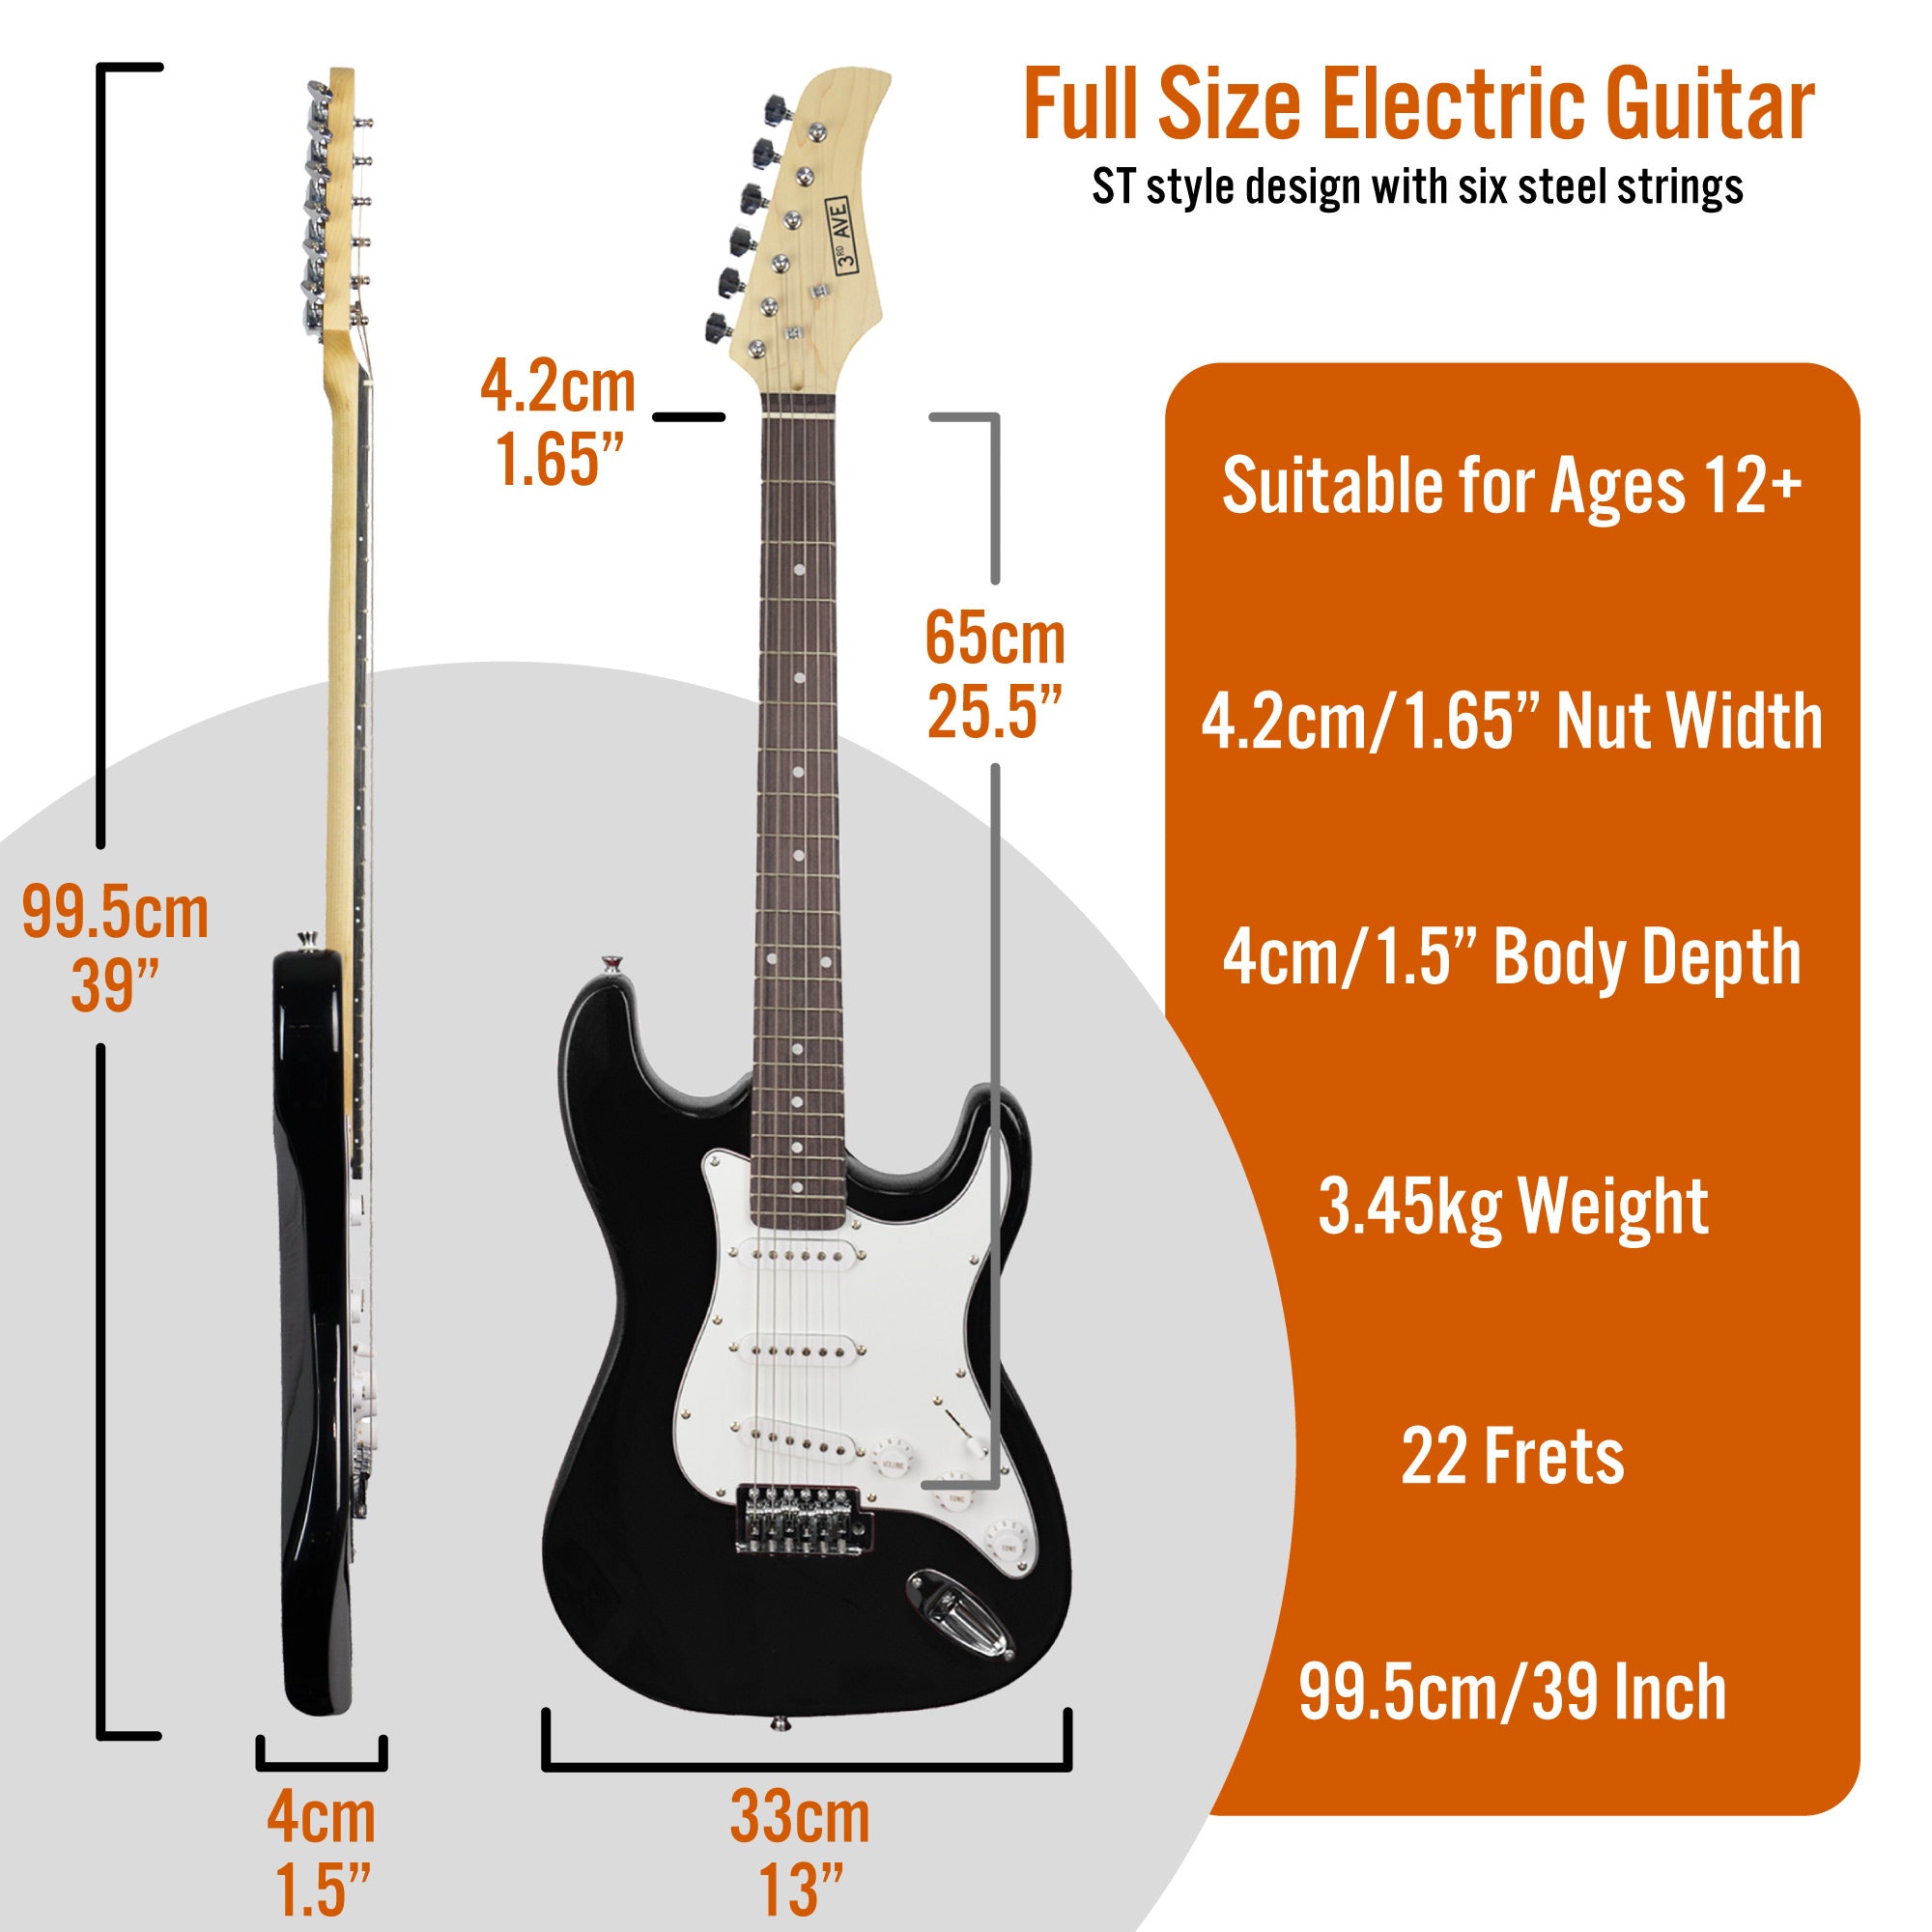 3rd Avenue Full Size Electric Guitar